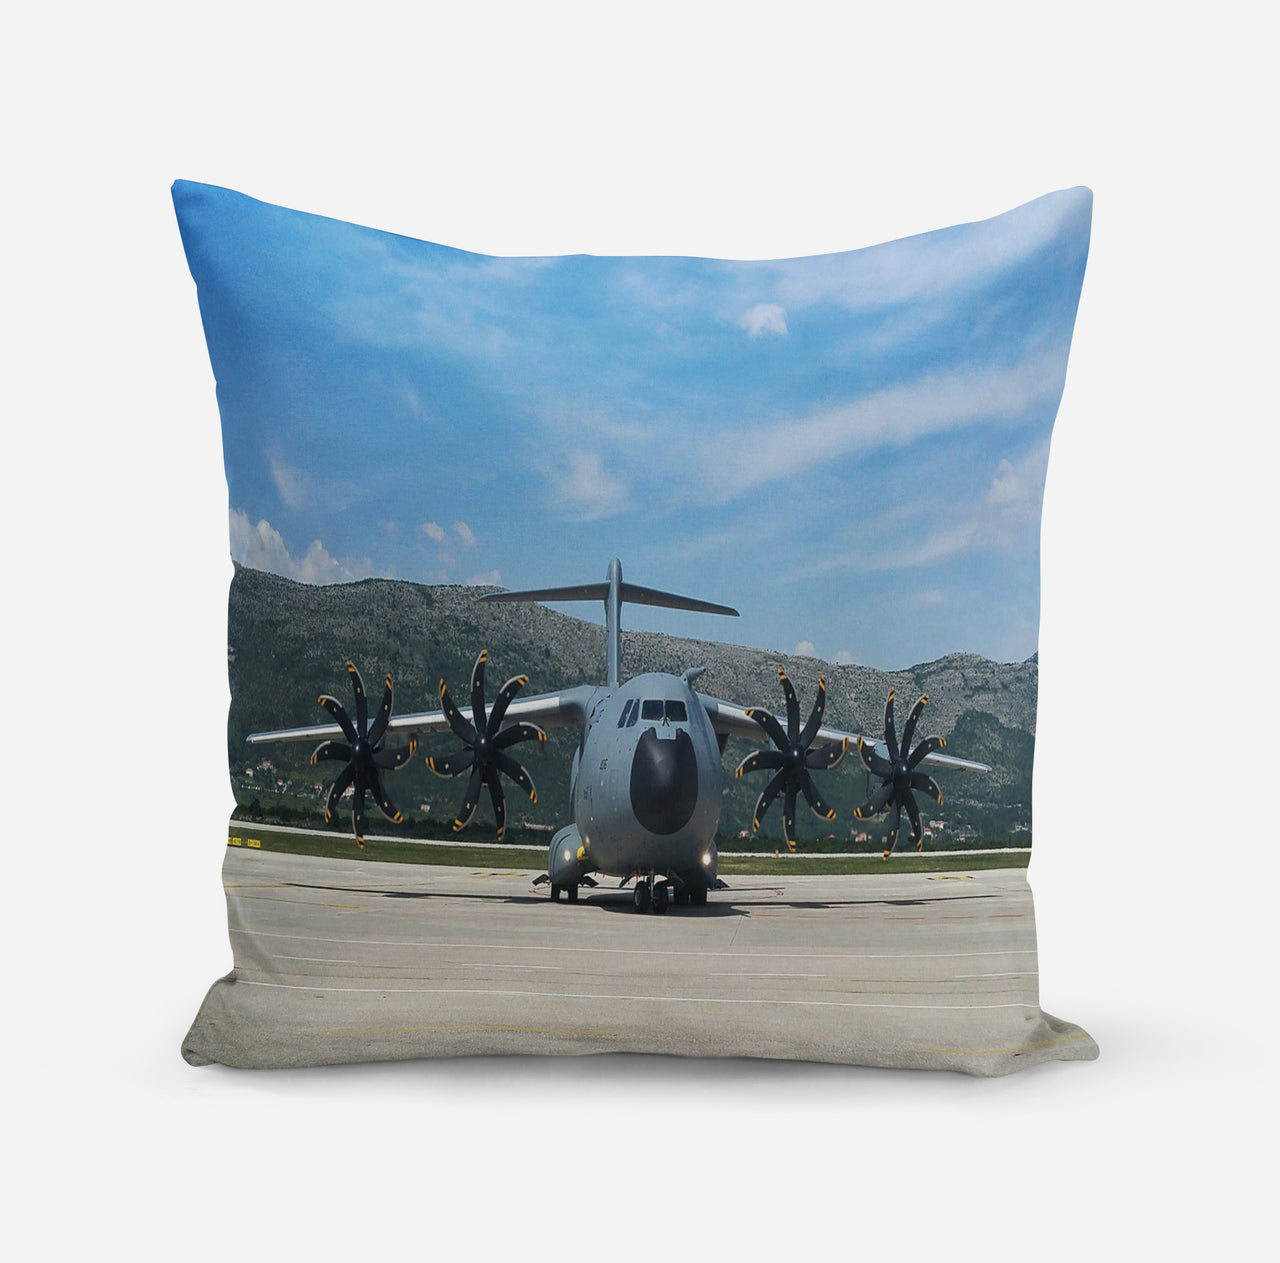 Face to Face with Airbus A400M Designed Pillows